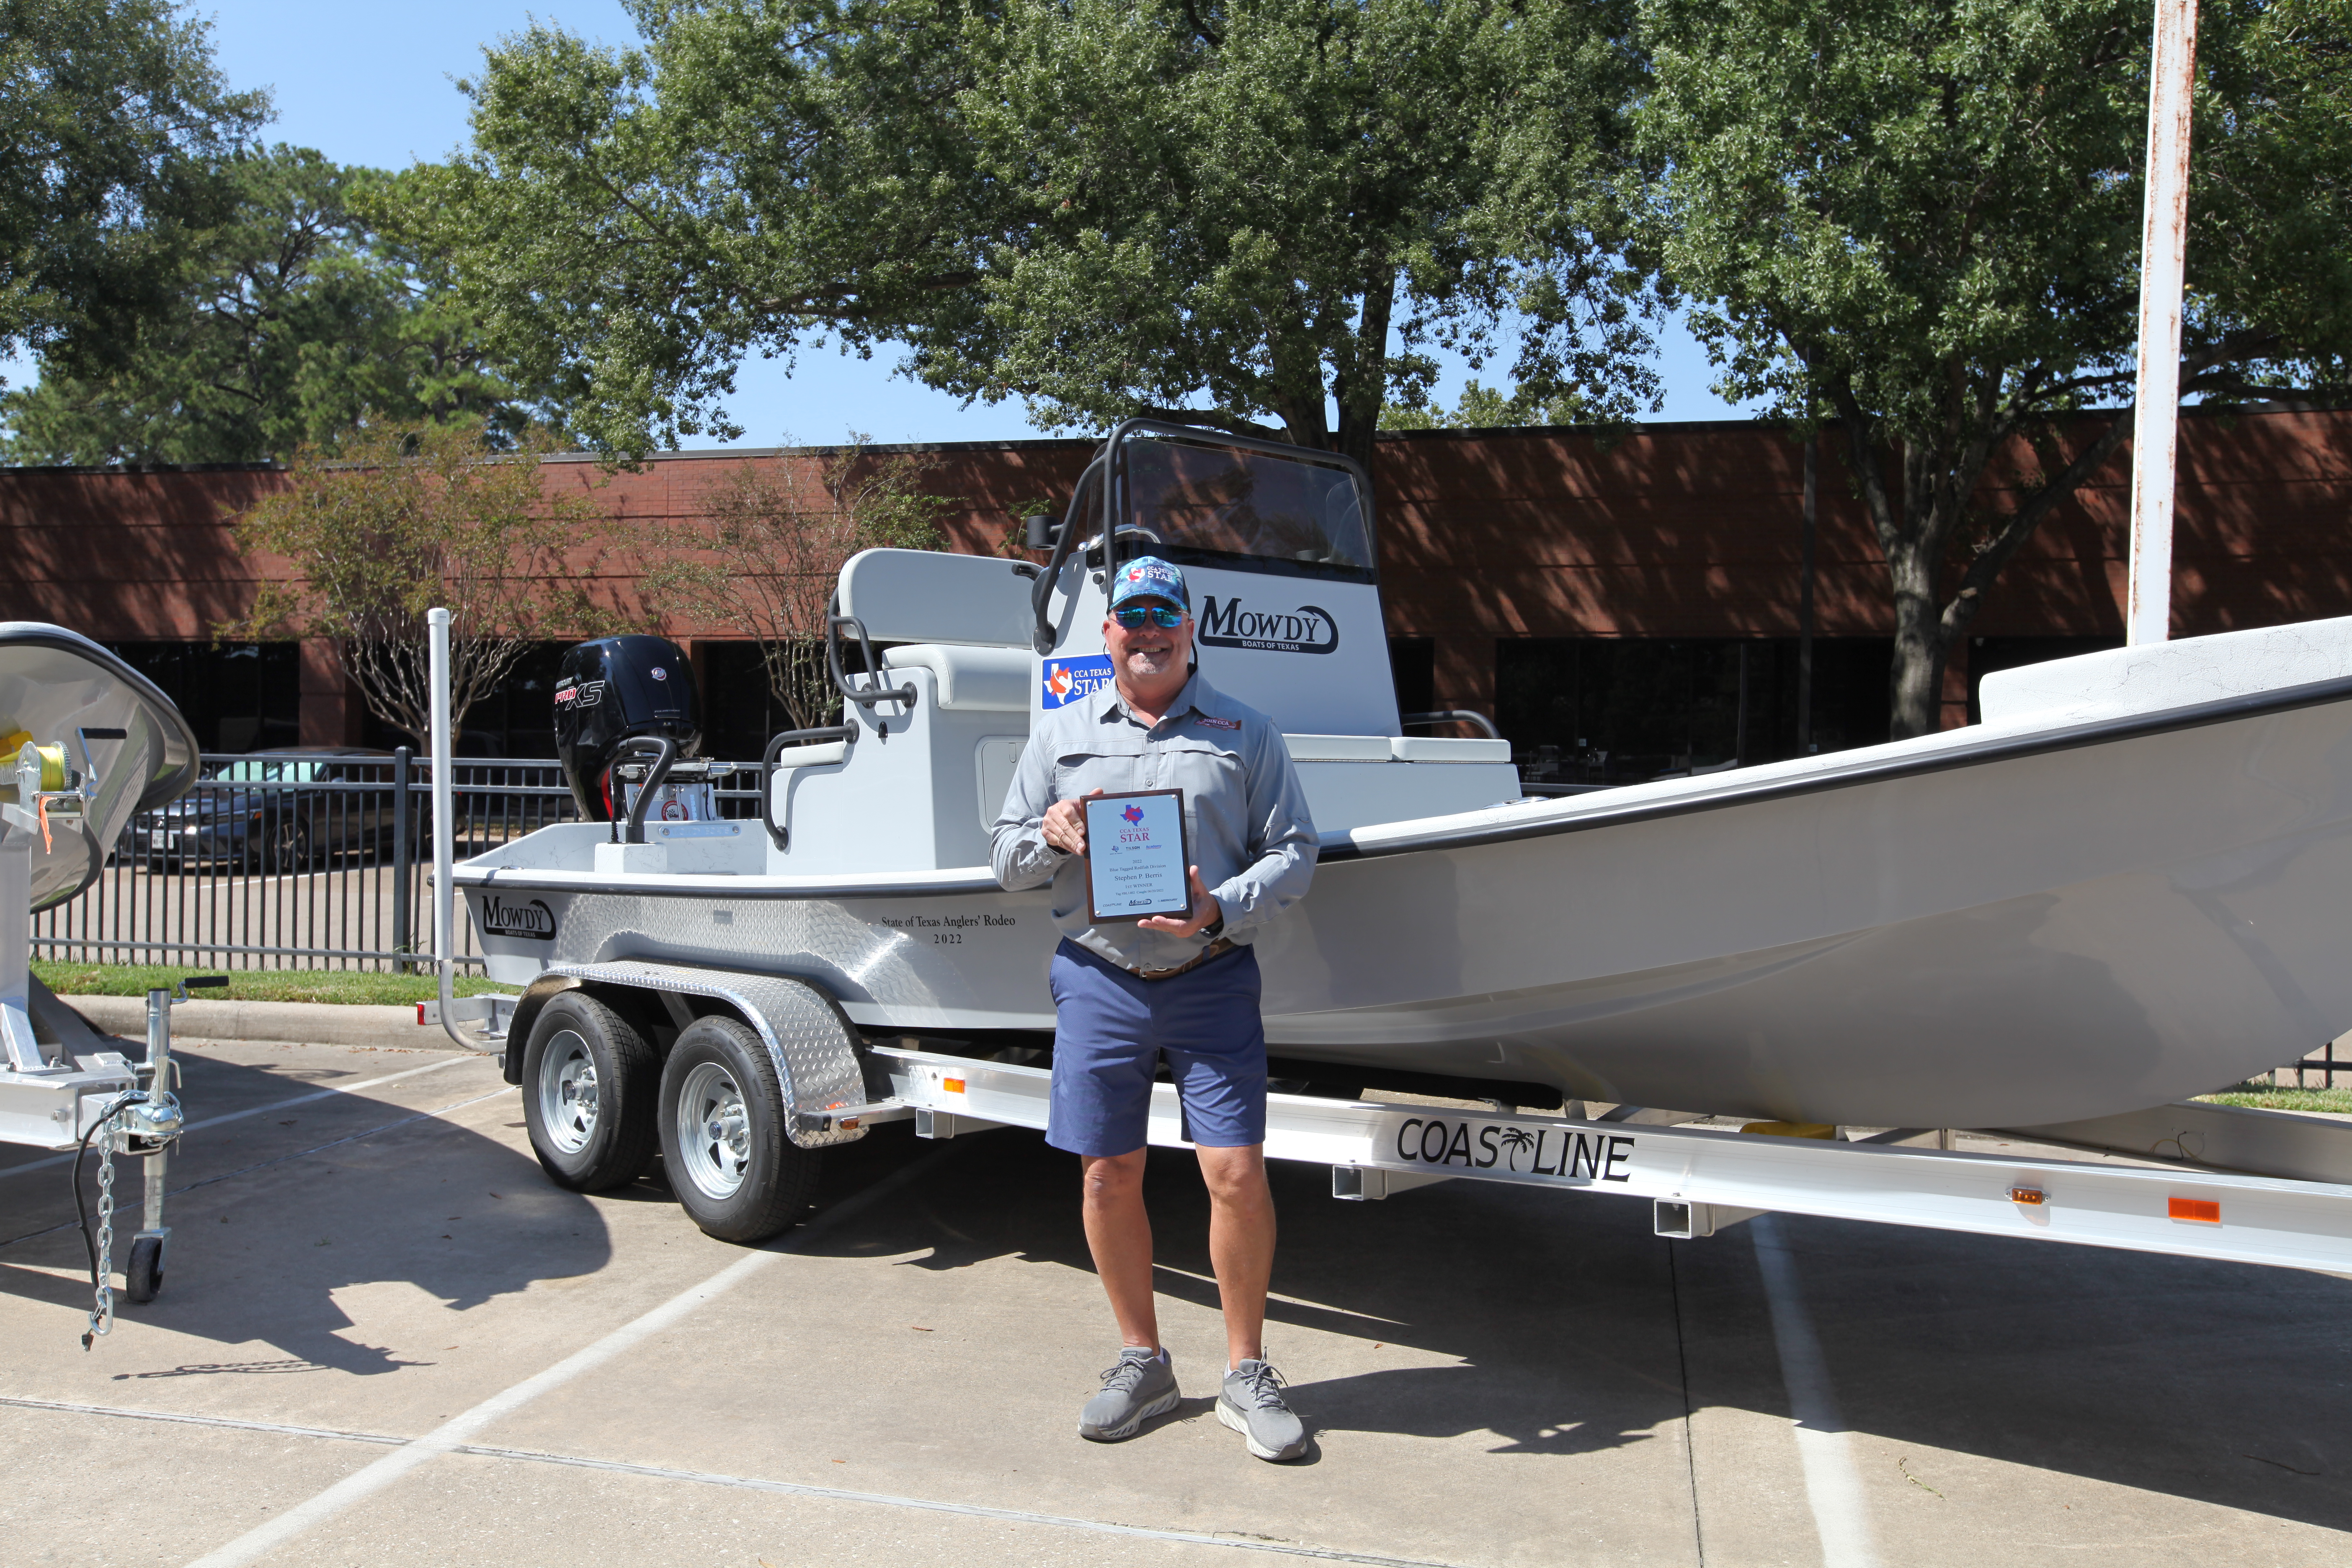 Skeeter FXR21 Bass Boat Raffle giveaway supporting Texas Police Chiefs  Association